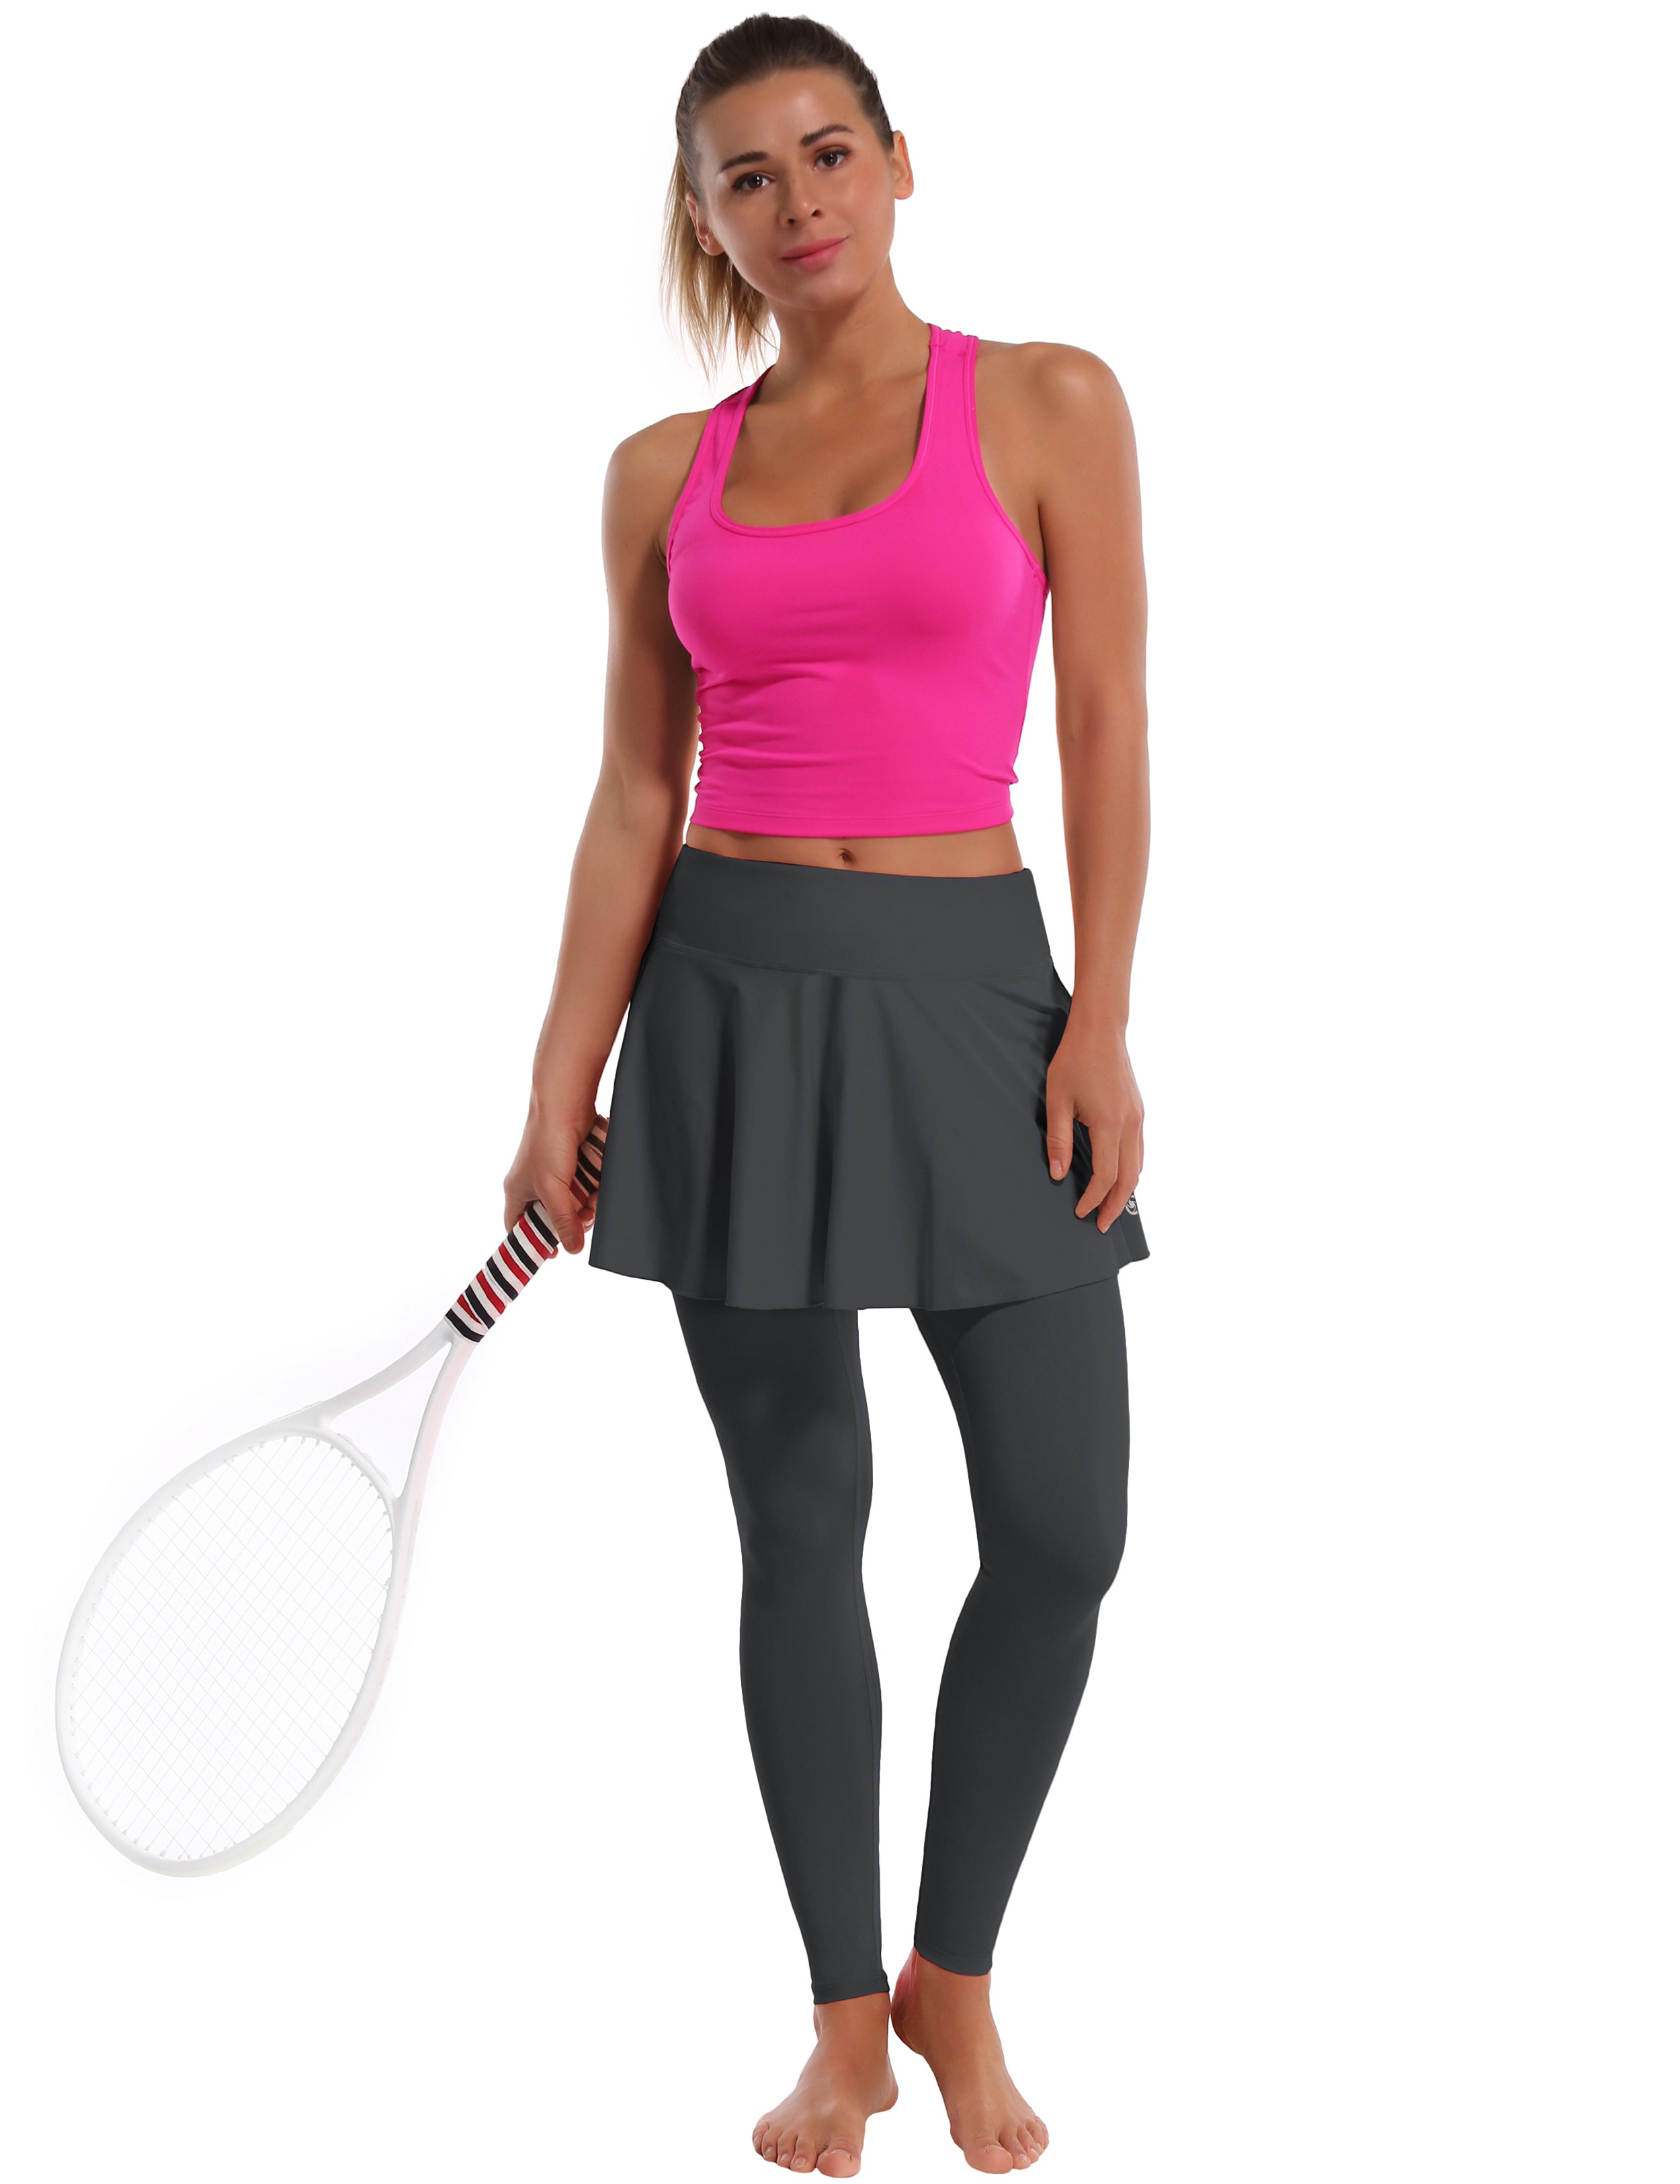 Athletic Tennis Golf Skort with Pocket Shorts shadowcharcoal 80%Nylon/20%Spandex UPF 50+ sun protection Elastic closure Lightweight, Wrinkle Moisture wicking Quick drying Secure & comfortable two layer Hidden pocket